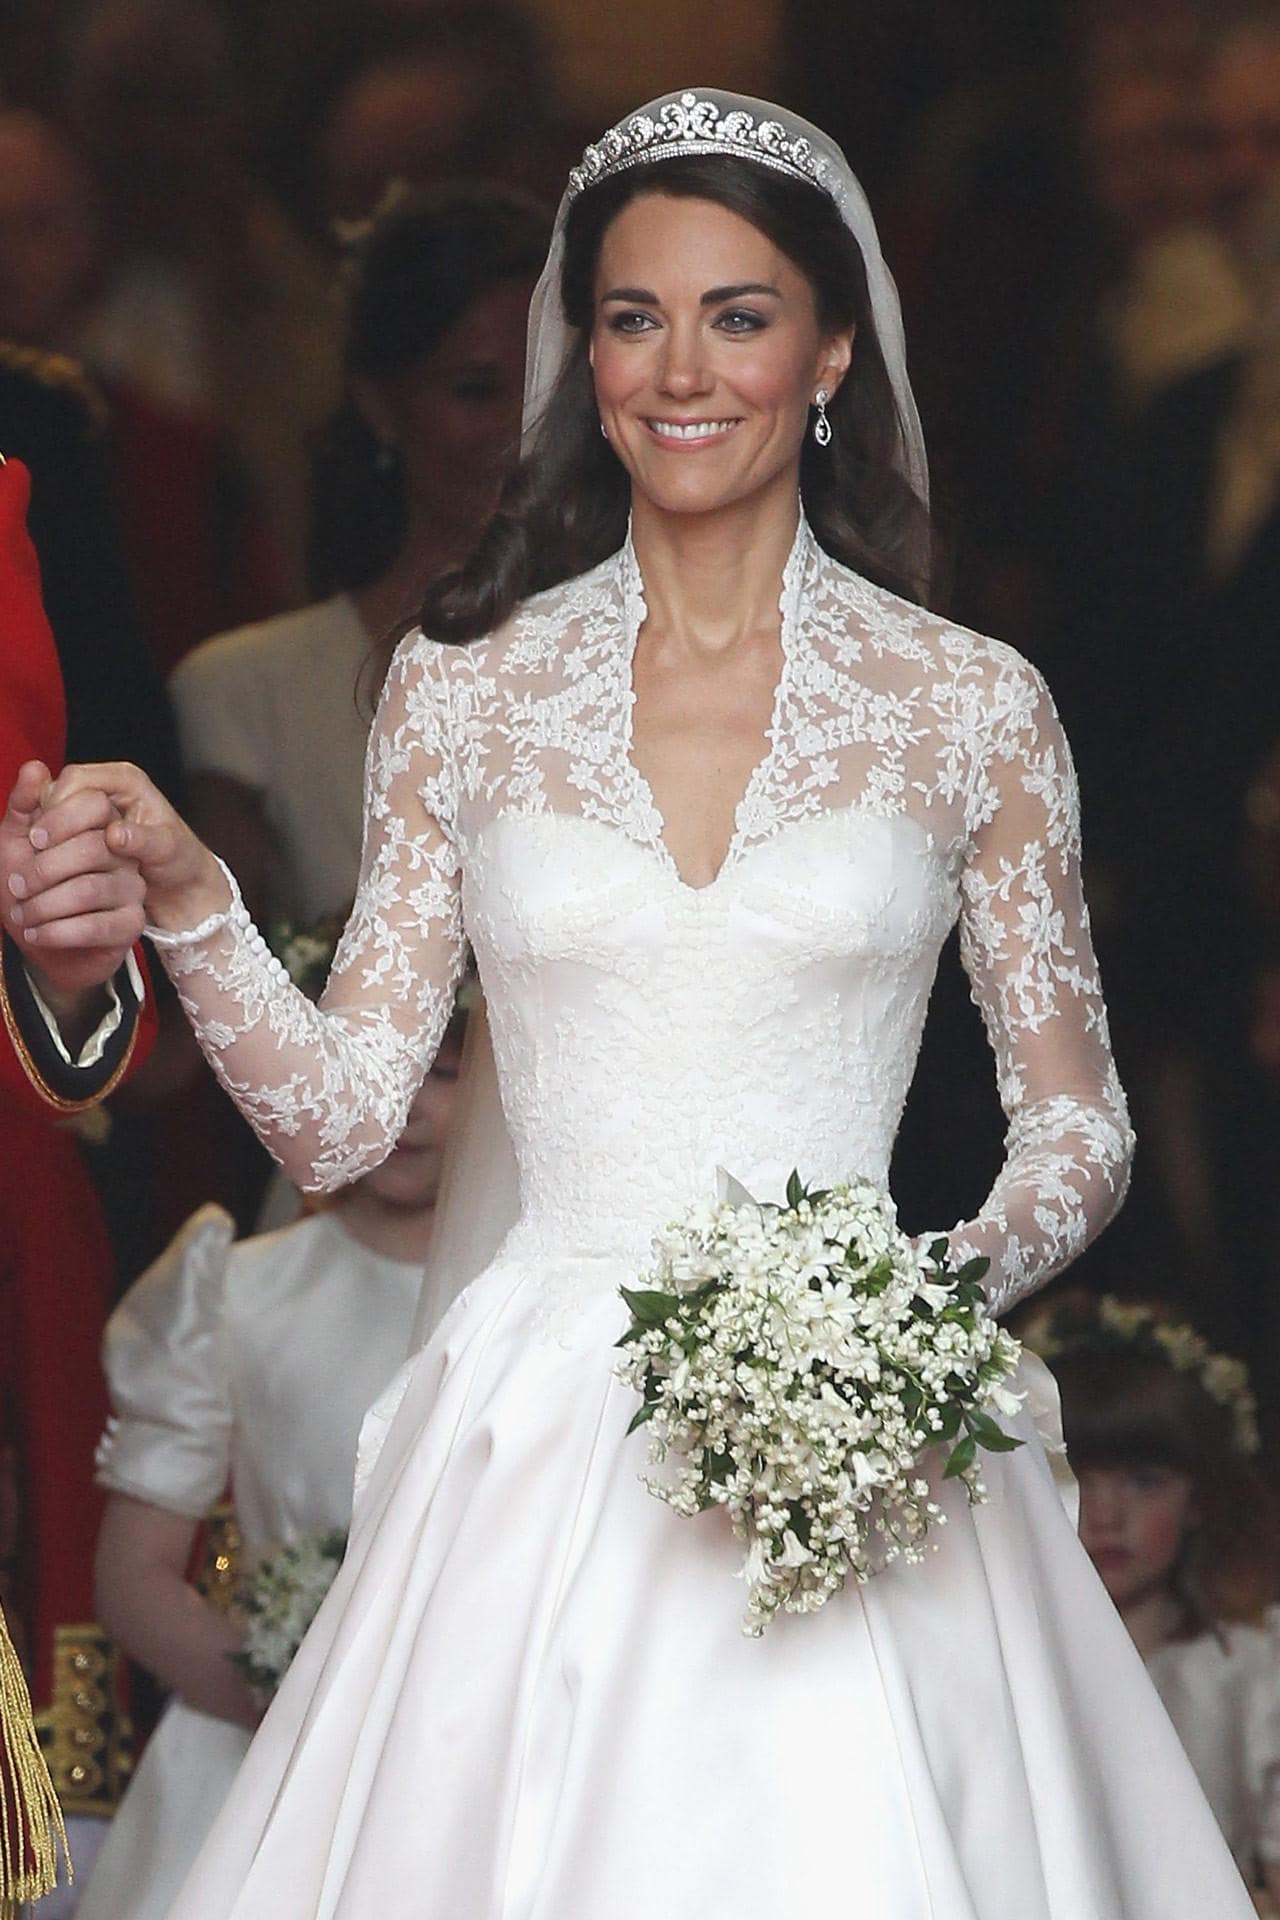 You Can Now Wear Kate Middleton’s Wedding Dress For $300 - Wedded